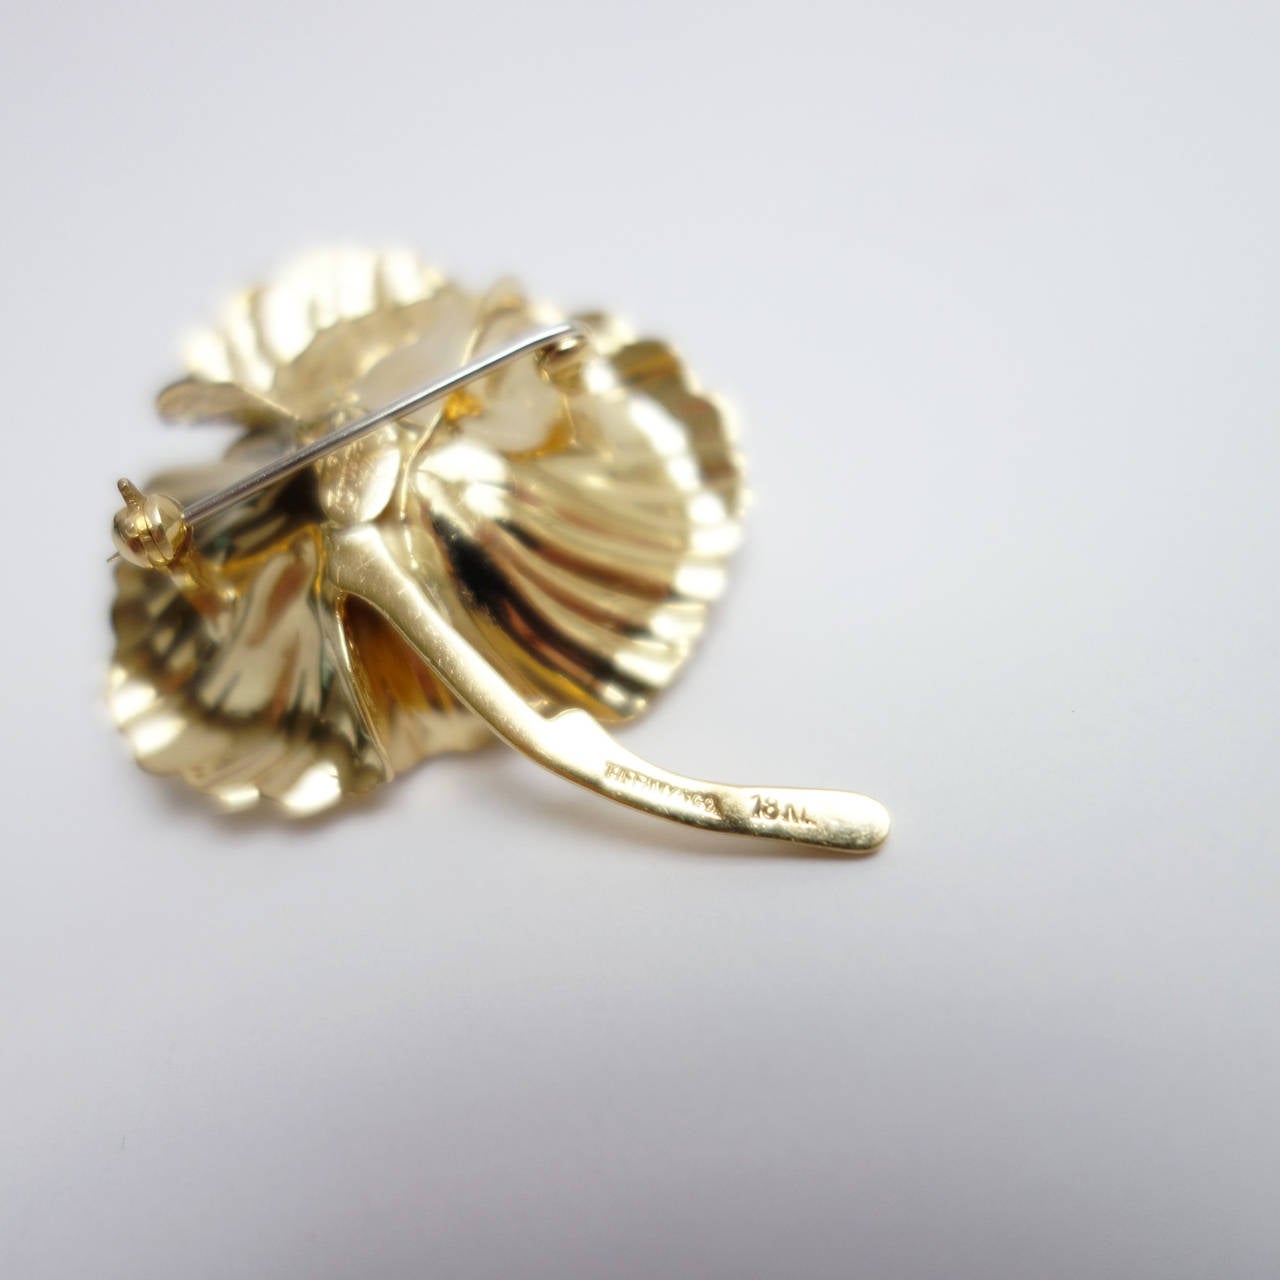 Created in 1964 by Henkel & Grosse Germany for Tiffany&Co. 18K yellow gold modernist flower pin with barked and polished finish. 

Hight: 43mm or 1 7/8 inches
Width: 36mm or 1 7/16 inches
Weight: 16.5 grams
Tested: 18k
Stamped: TIFFANY&CO. 18k